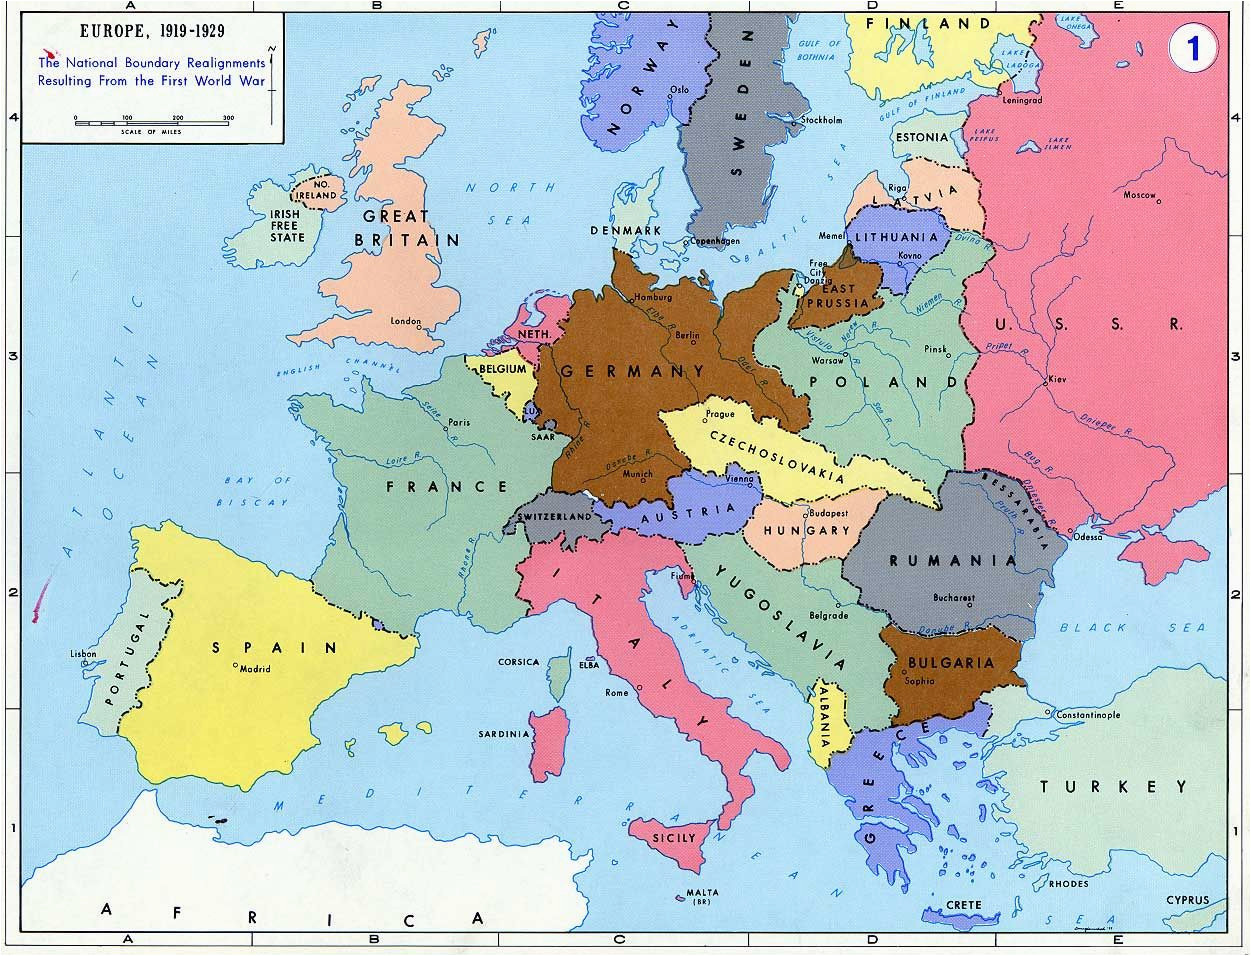 pre world war ii here are the boundaries as a result of